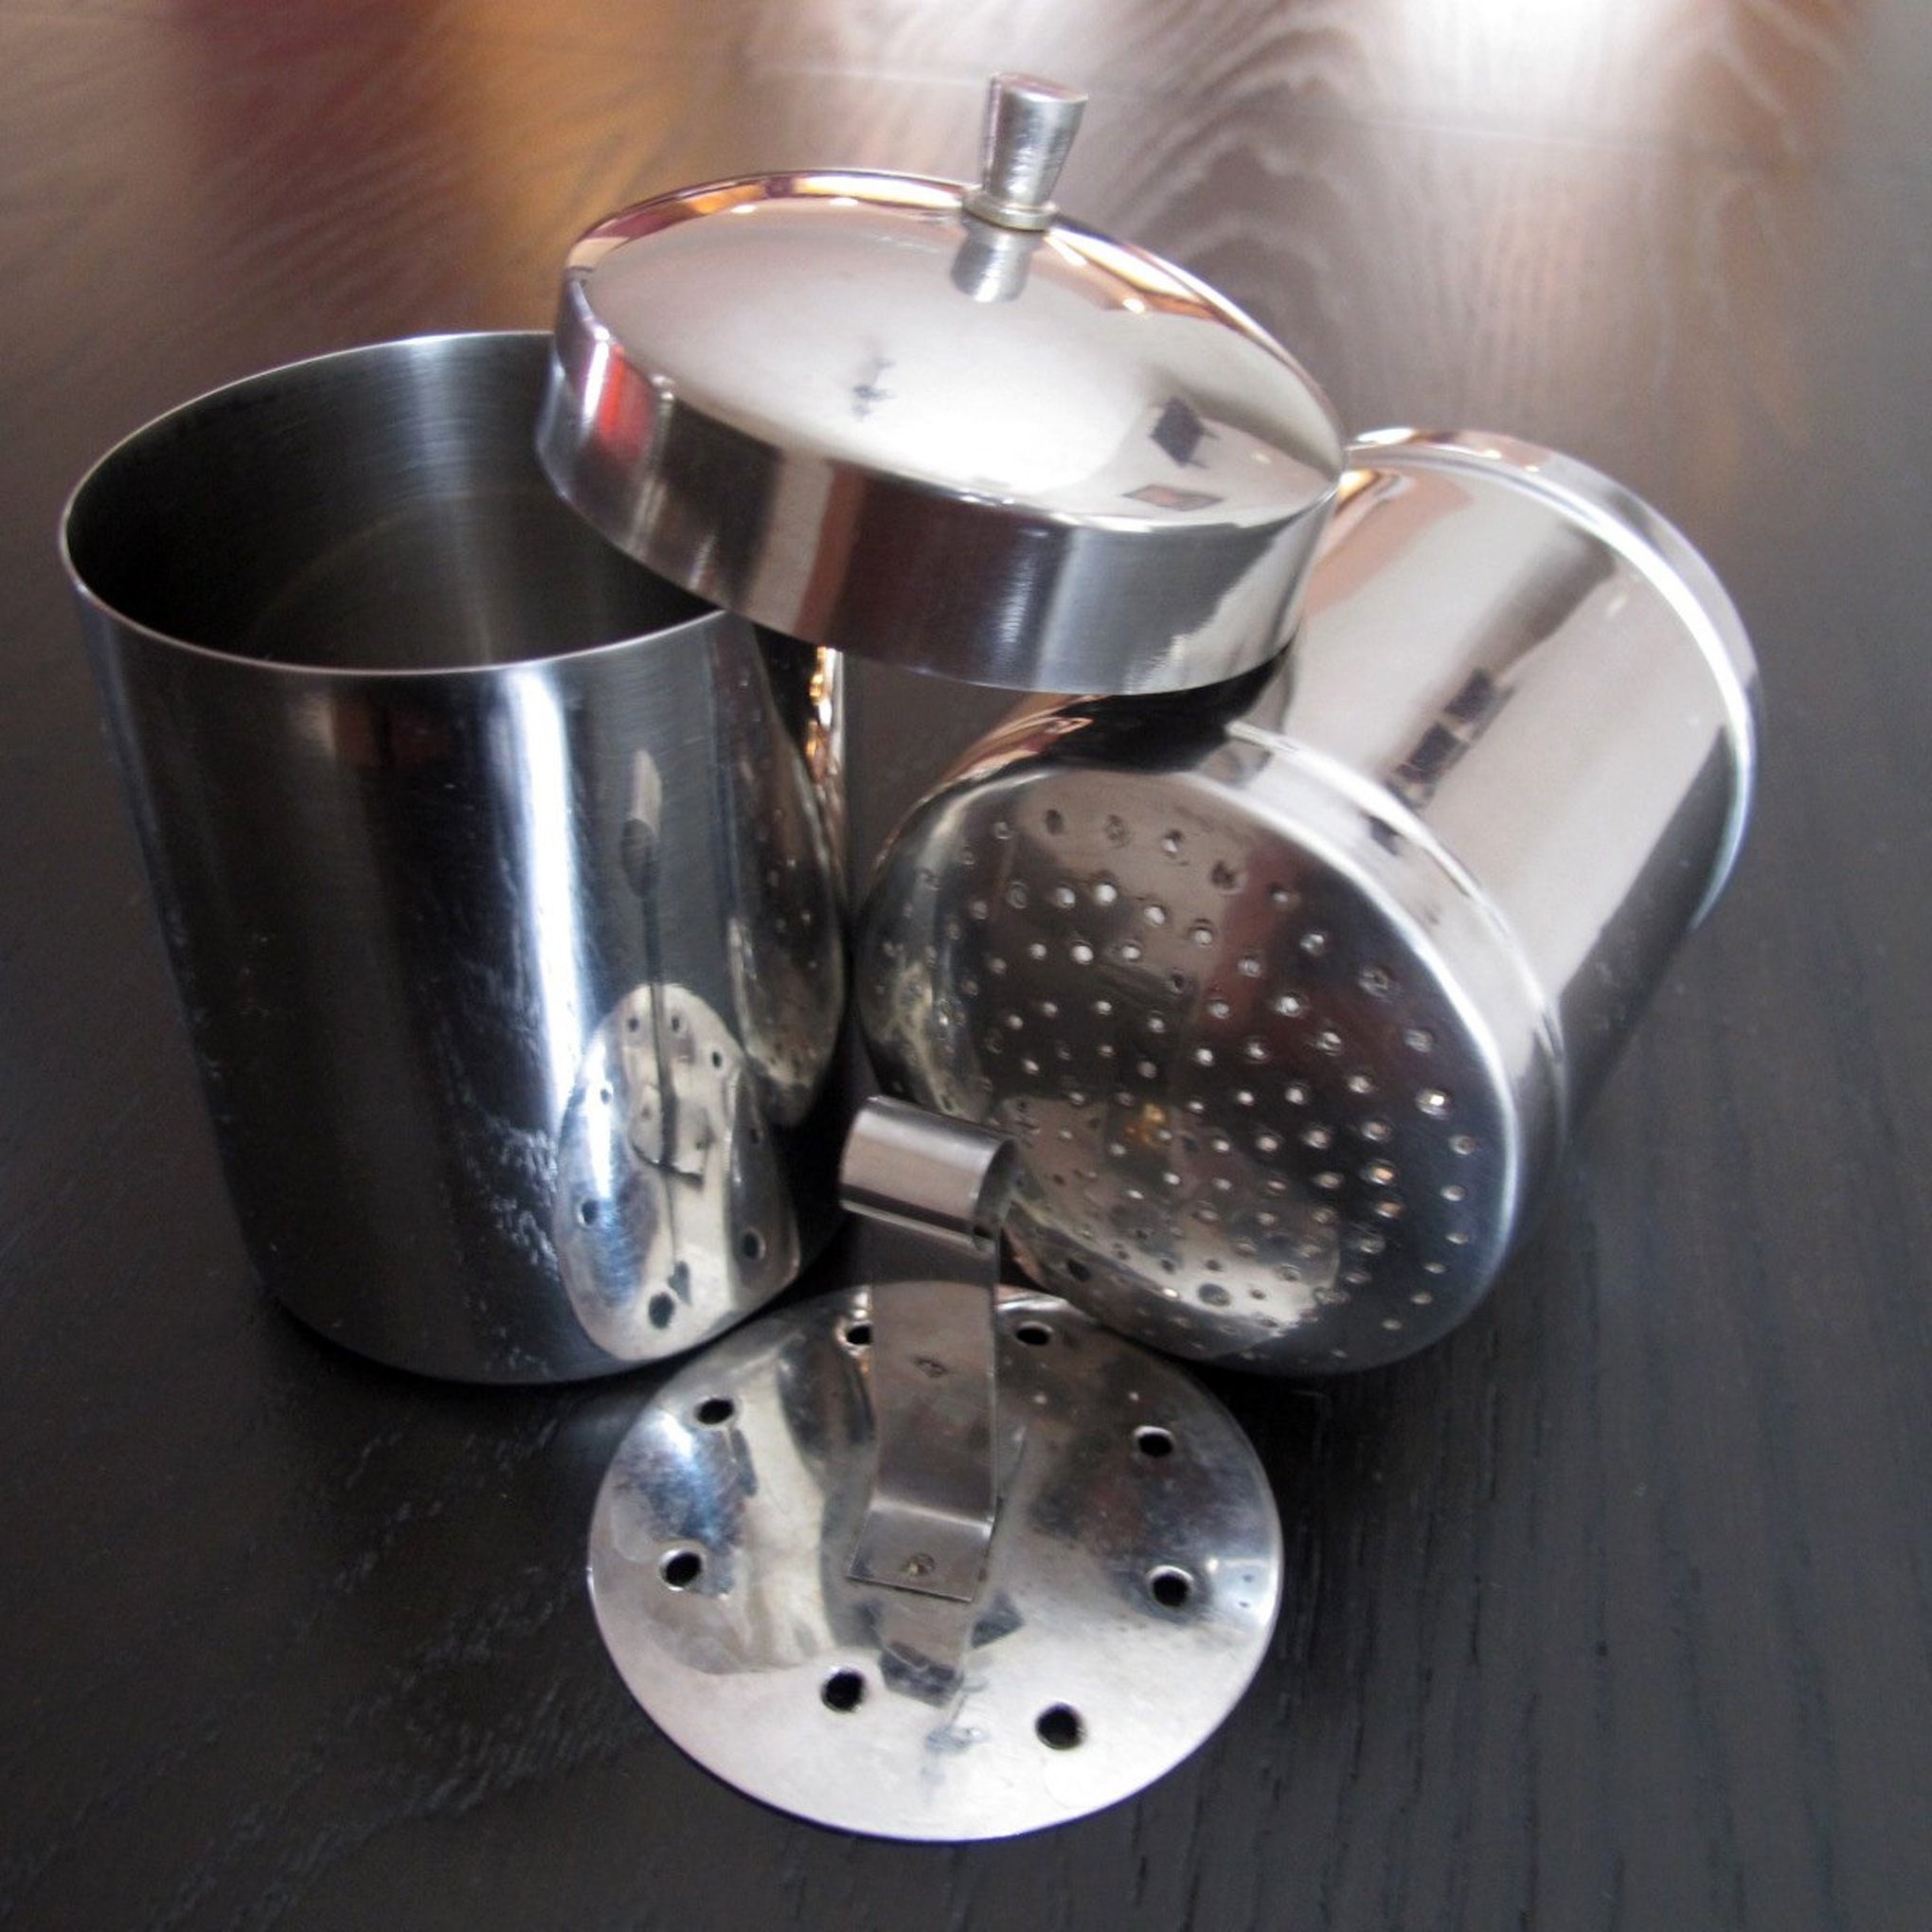 Budan Stainless Steel South Indian Filter Coffee Maker Order On